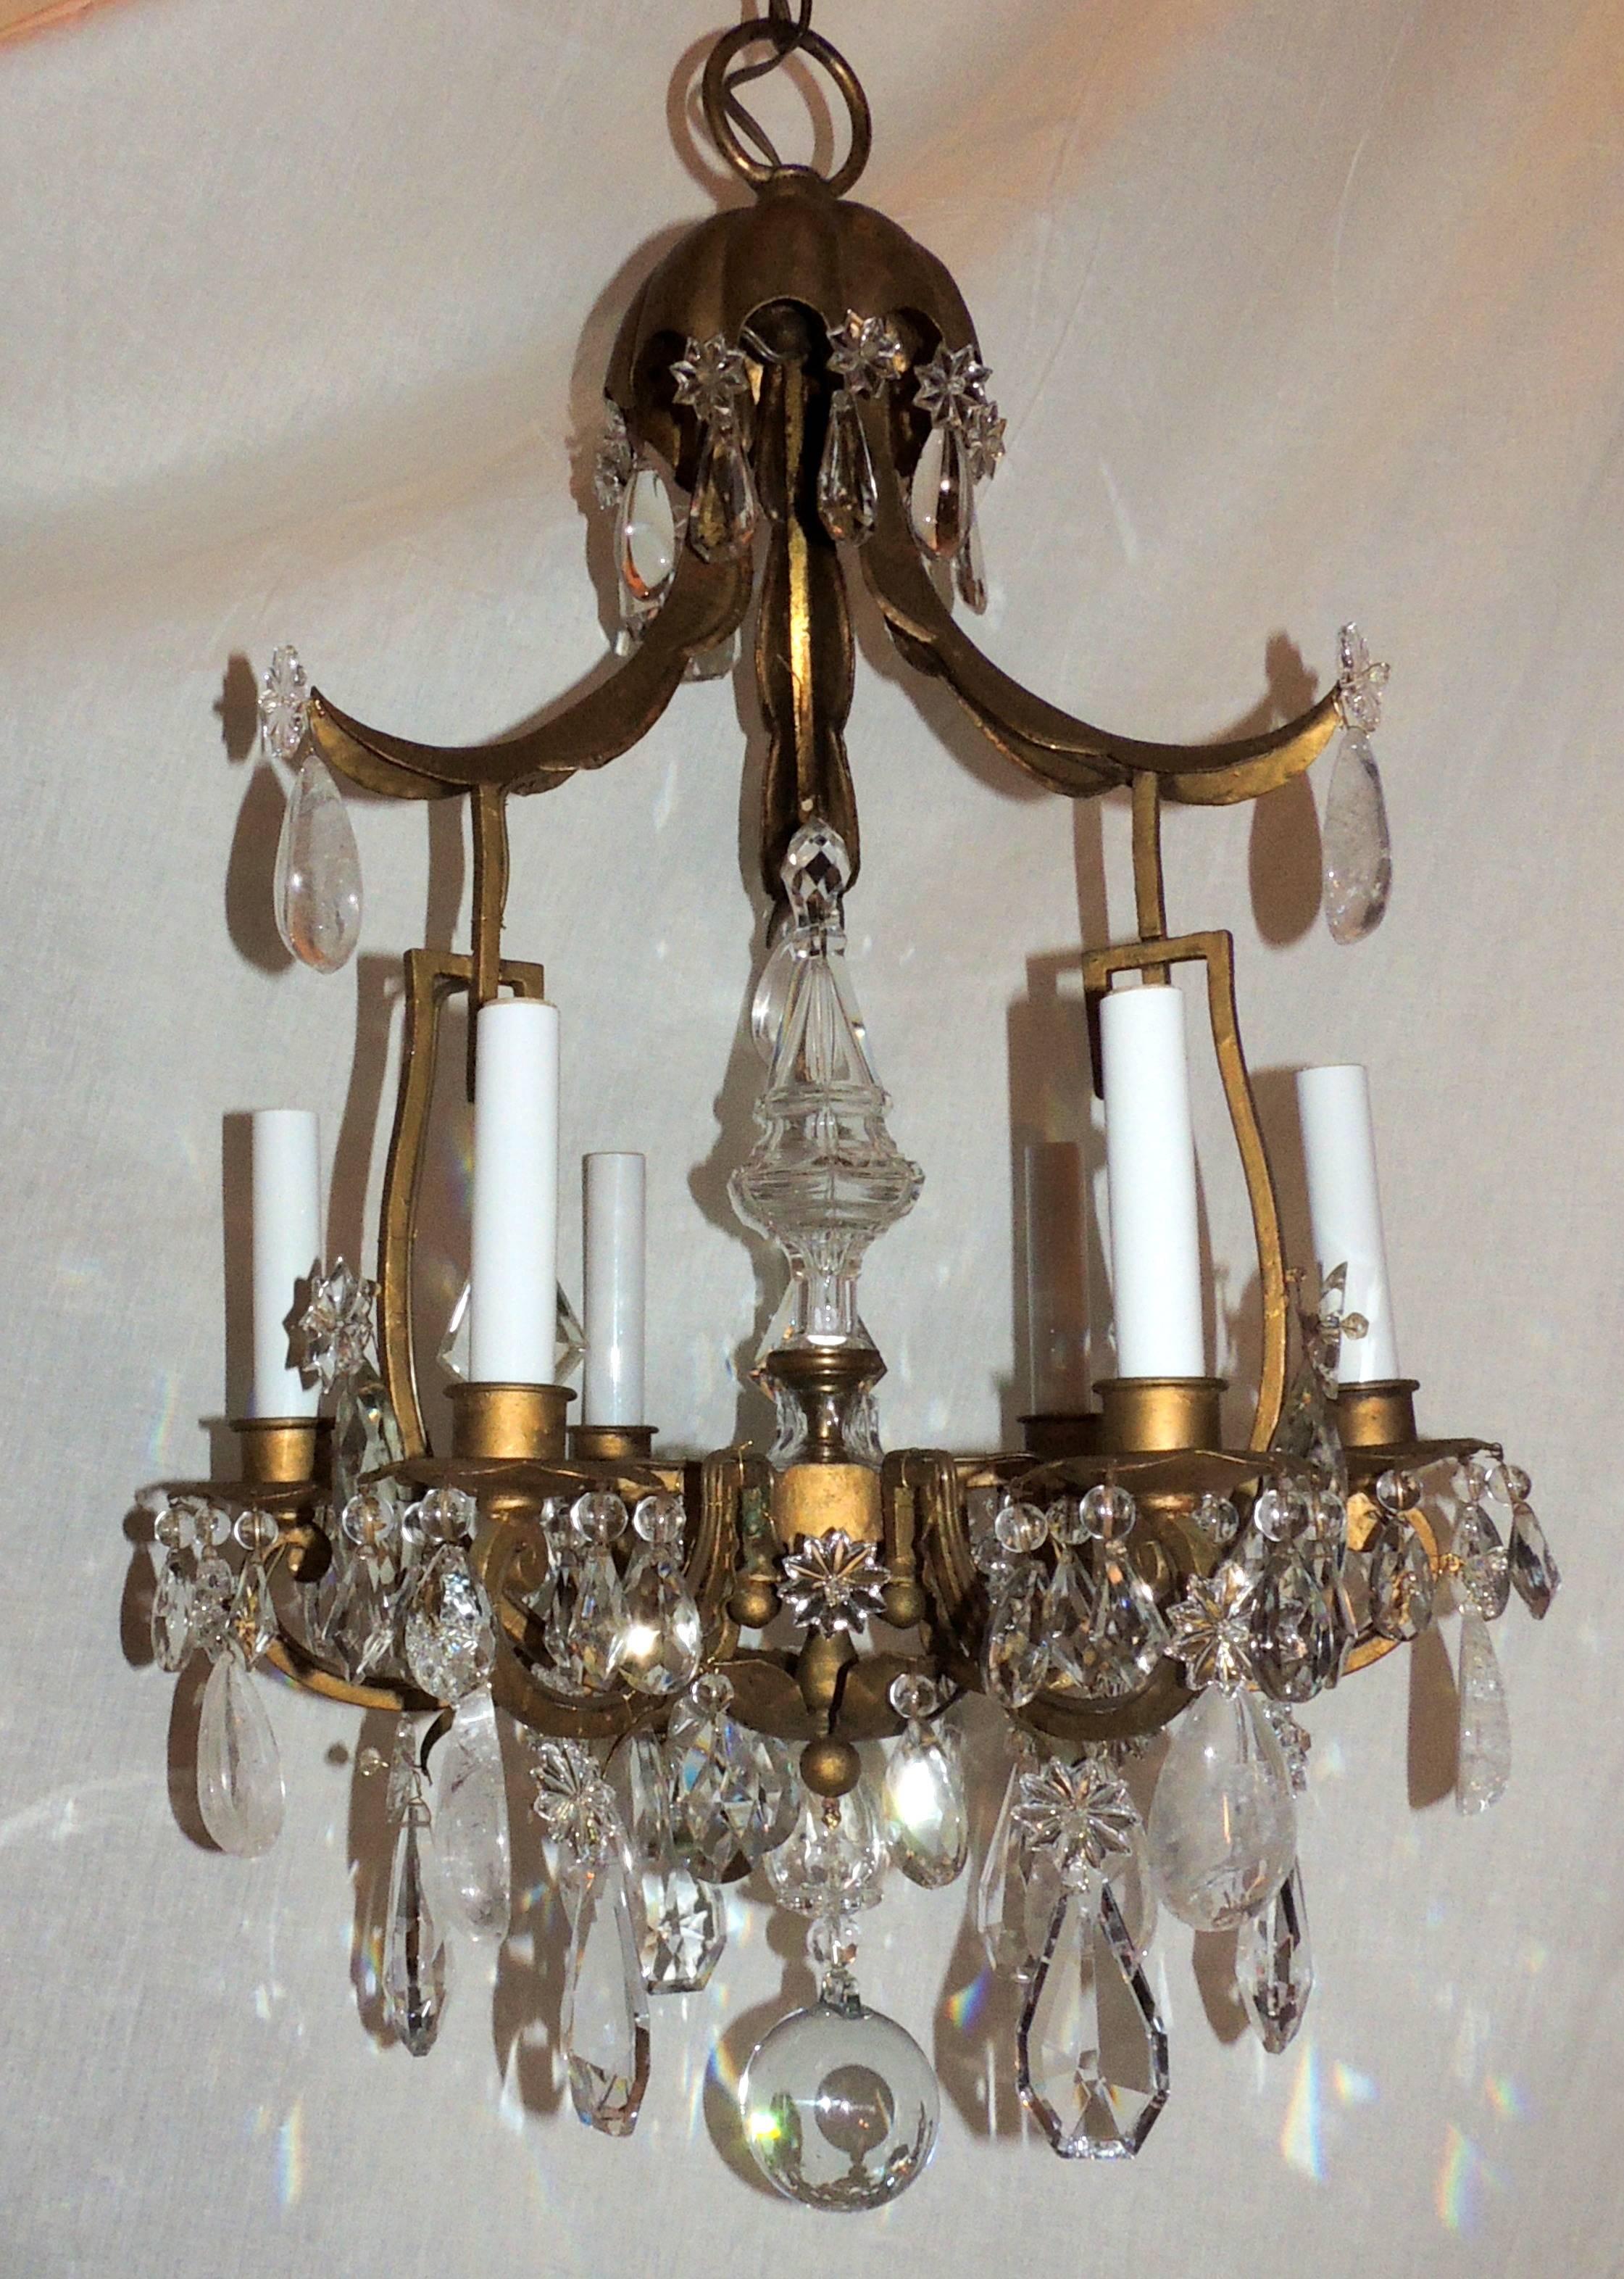 A wonderful French Pagoda form gold gilt and rock crystal Bagues style chandelier fitted with six lights each taking a max 60 watts per candelabra socket, newly wired.
Comes with chain and canopy and ready to install and enjoy.
Measures: 29